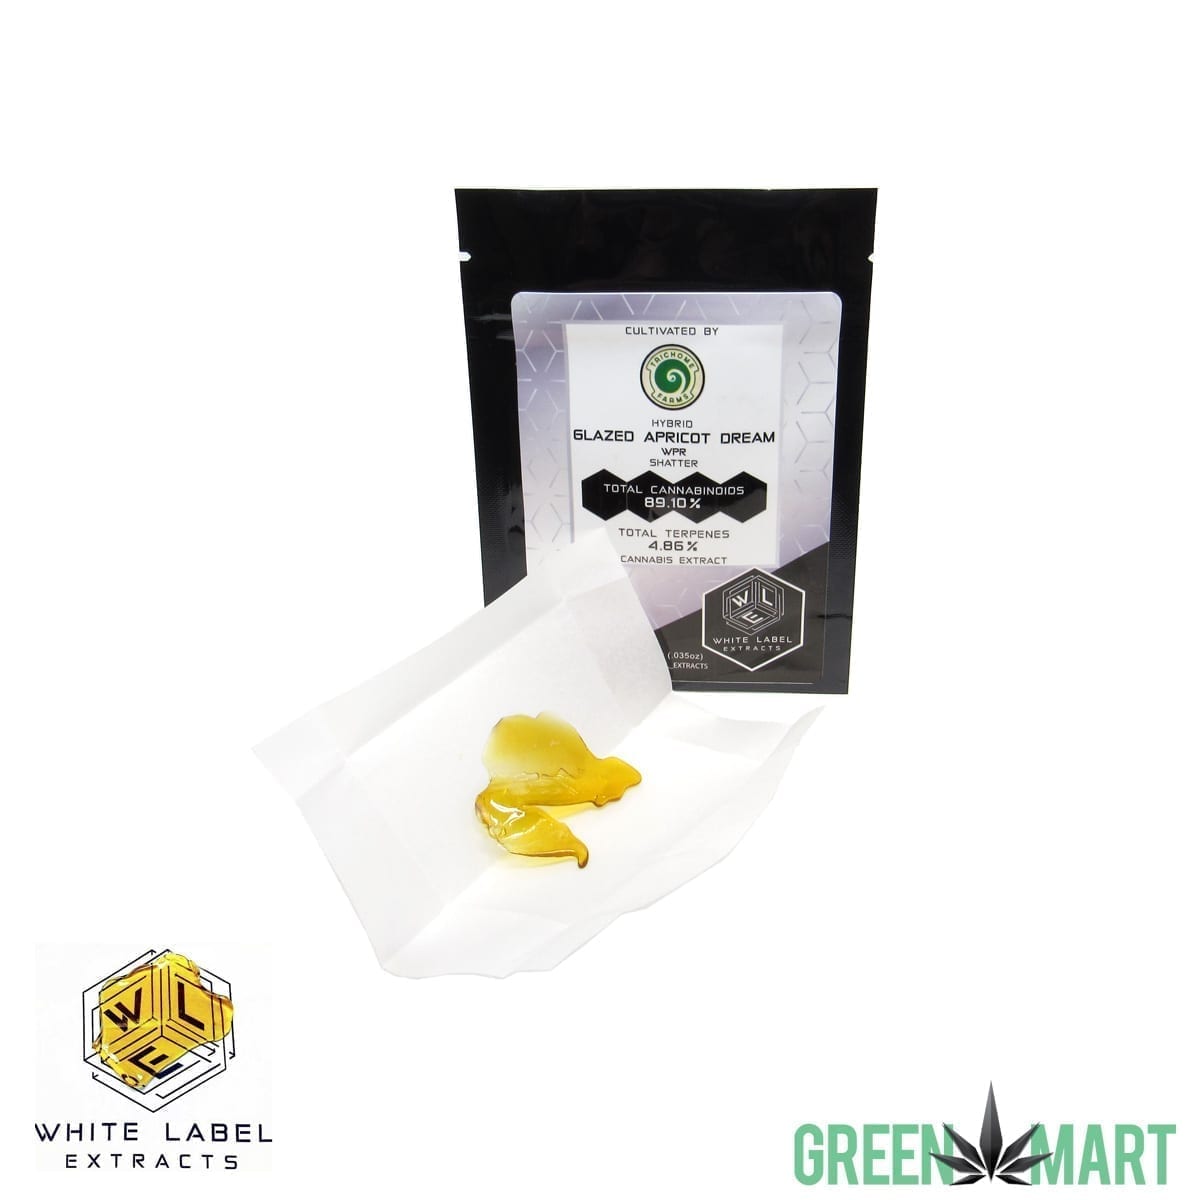 White Label Extracts - Glazed Apricot Dream Shatter